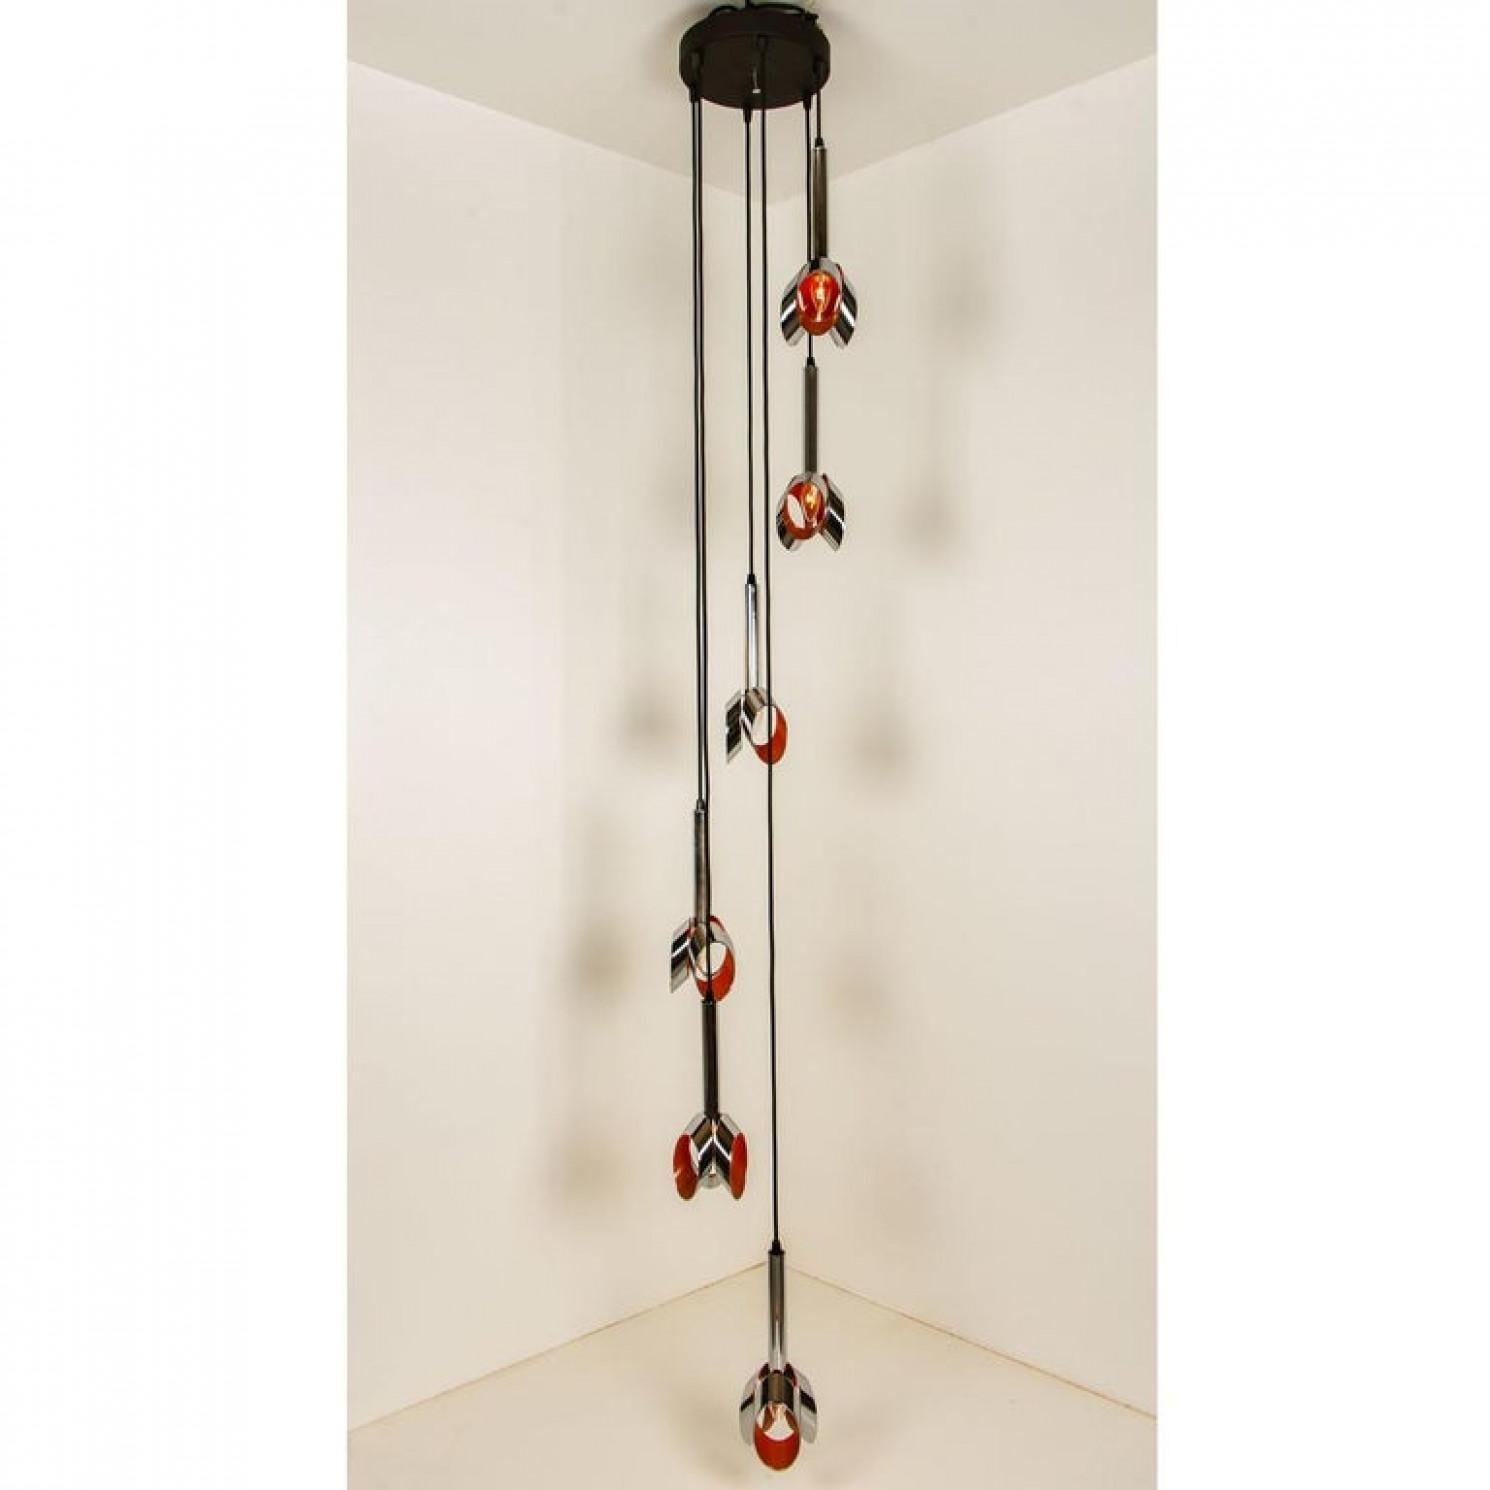 A special cascade with 6 chrome and orange pendants. The light is made in the style of RAAK, a dutch manufacturer of the 60/70's.
The light consists of 6 chrome pendants with a laquered orange inside.

This lamp is can be used for a room, a stunning